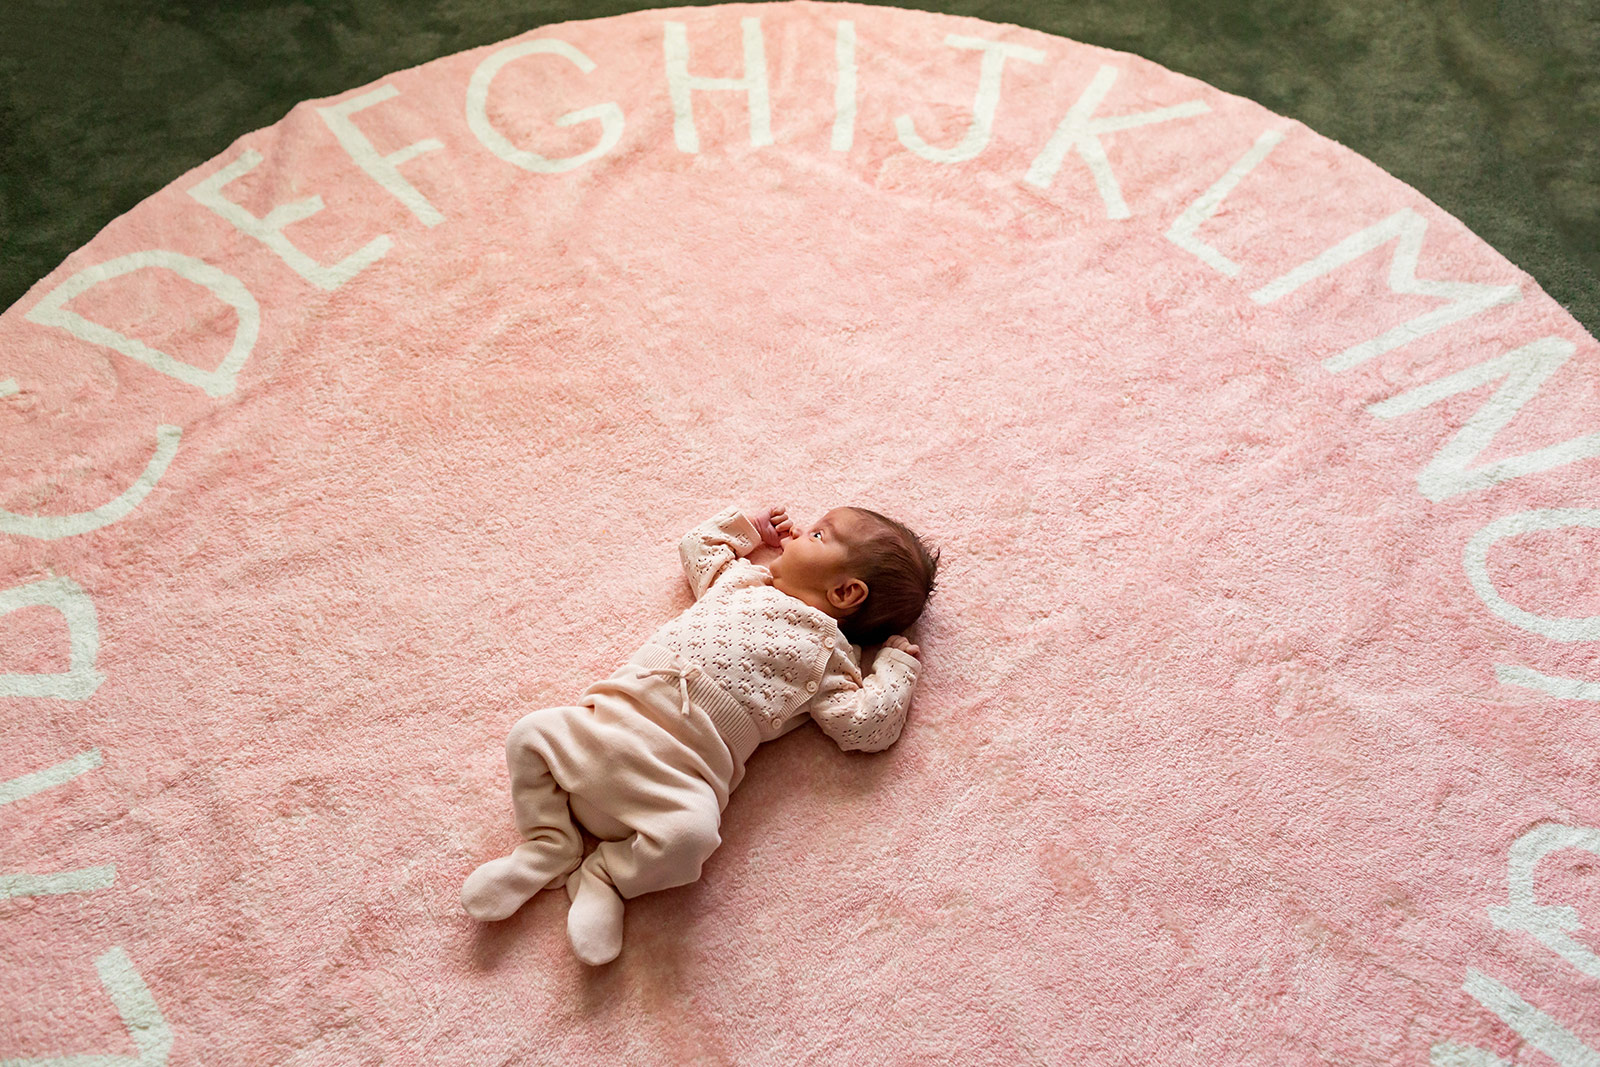 Baby Quinn lies in the middle of a large pink rug with an alphabet border.